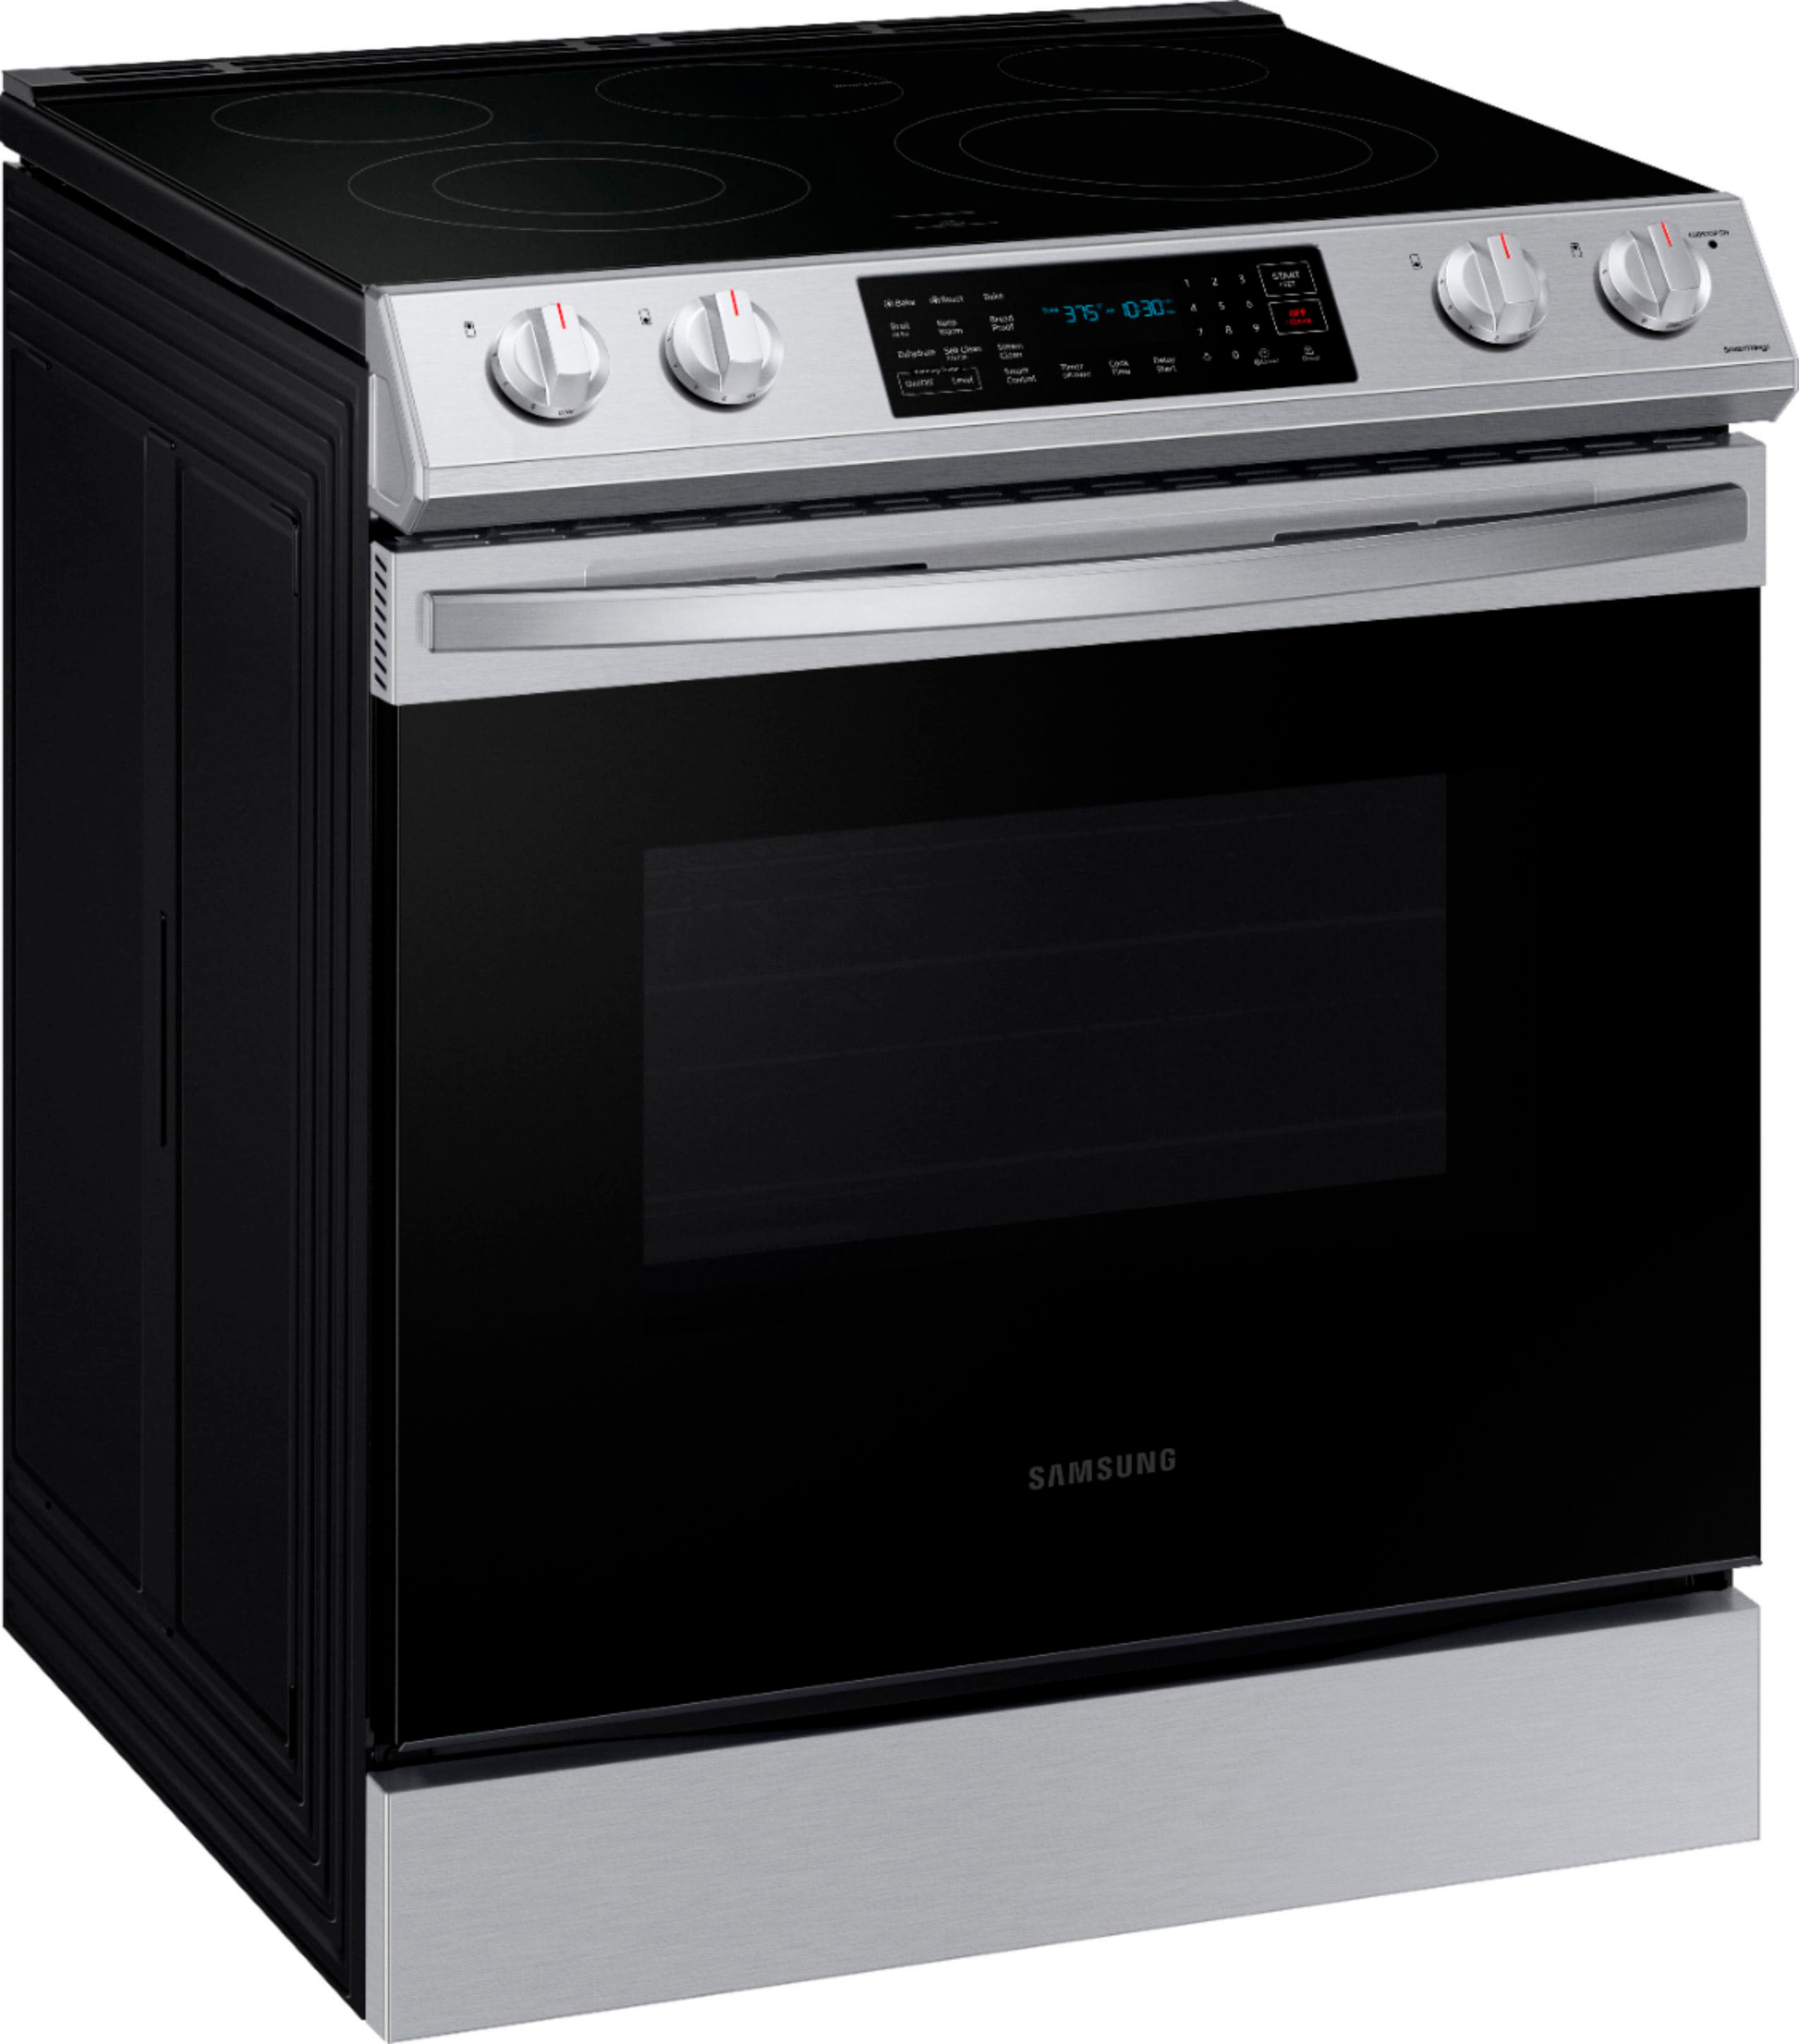 Angle View: Samsung - Geek Squad Cert Refurb 6.3 cu. ft. Front Cntrl Slide-in Electric Range with Convection & Wi-Fi, Fingerprint Resistant - Stainless steel